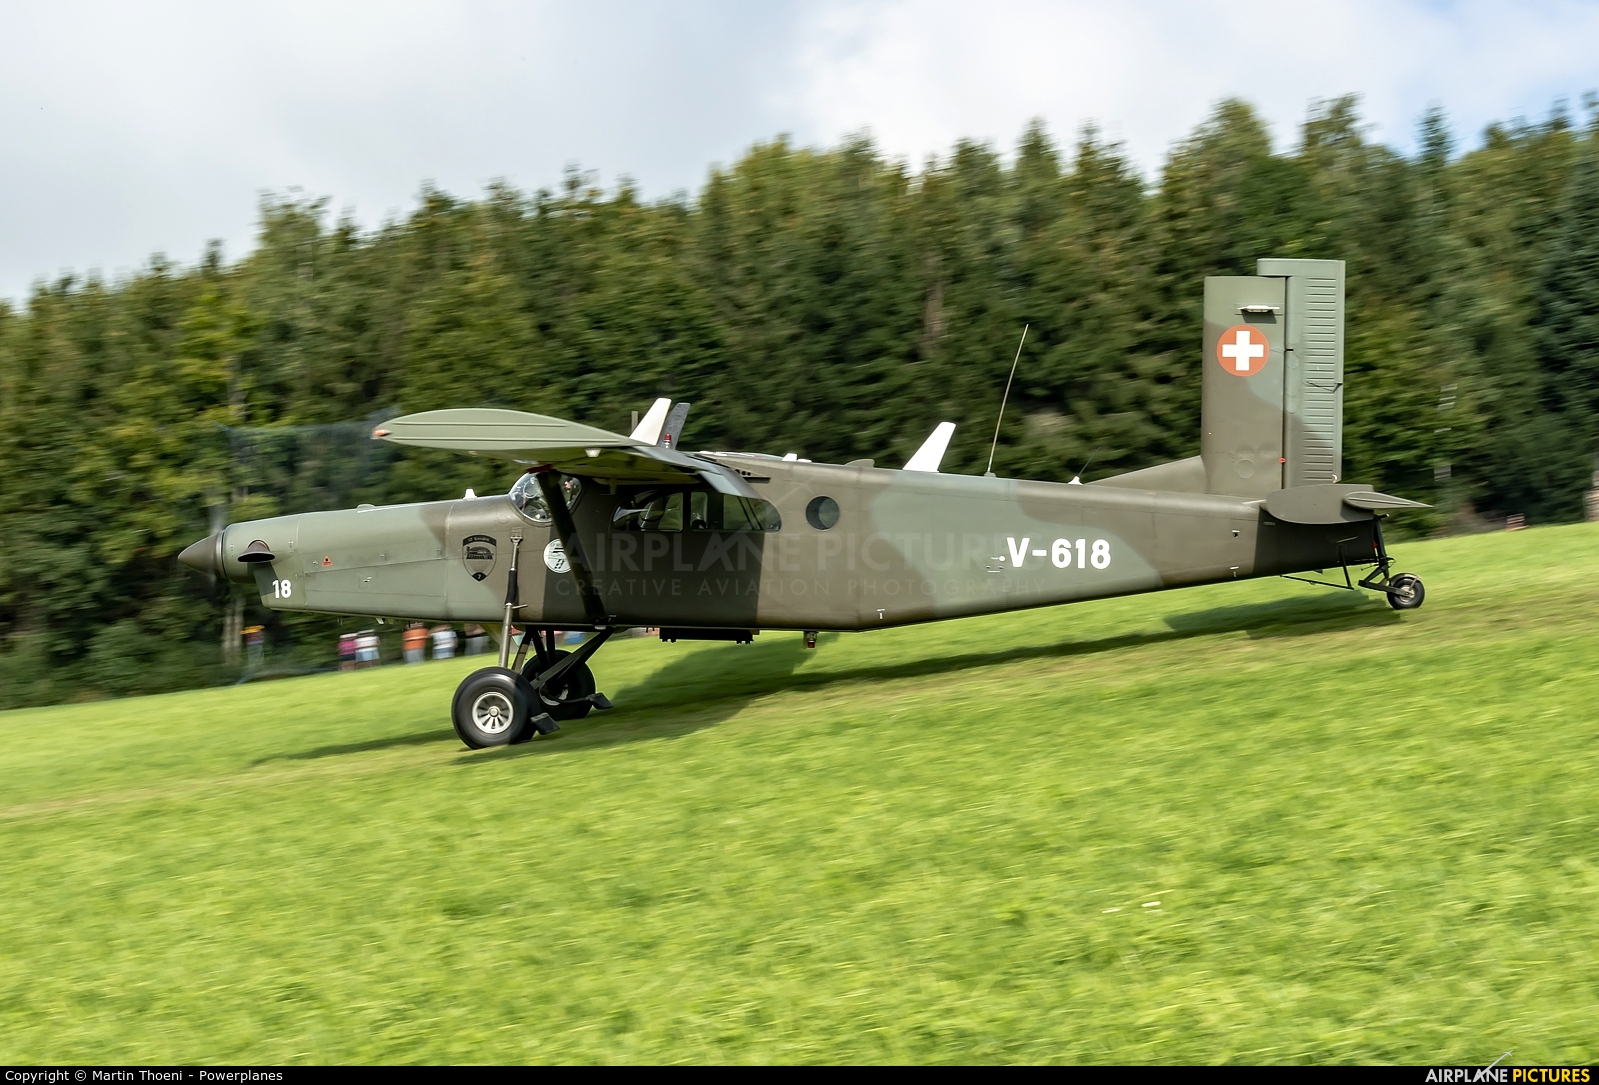 Switzerland - Air Force V-618 aircraft at Off Airport - Switzerland